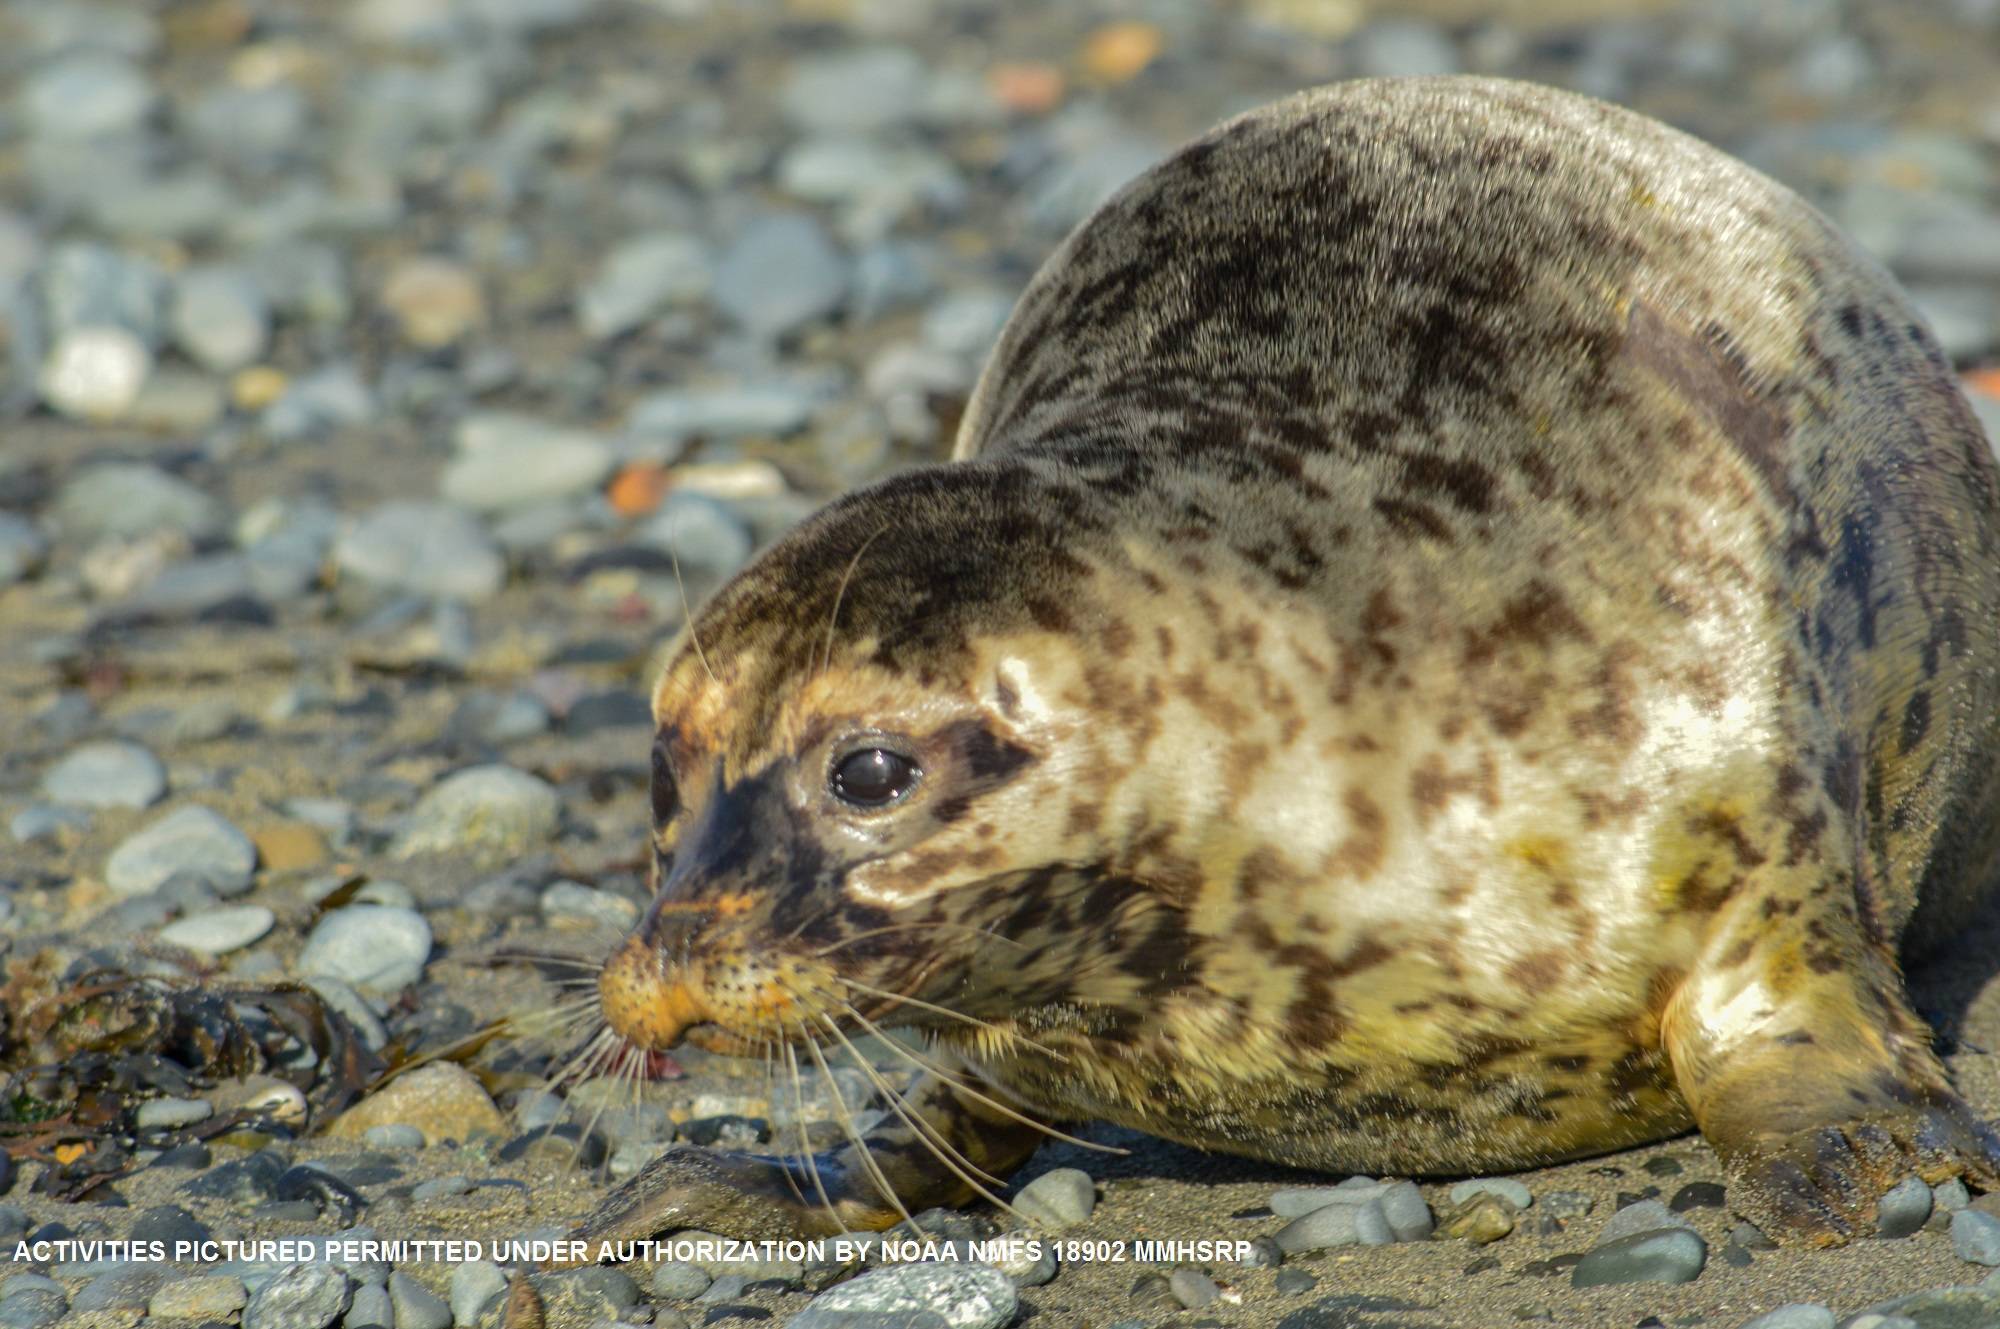 Hubbard, a male harbor seal rescued from Clam Gulch in July, is released back into the wild on Bishop’s Beach in Homer, Alaska on Nov. 8, 2018. (Photo courtesy Alaska SeaLife Center)